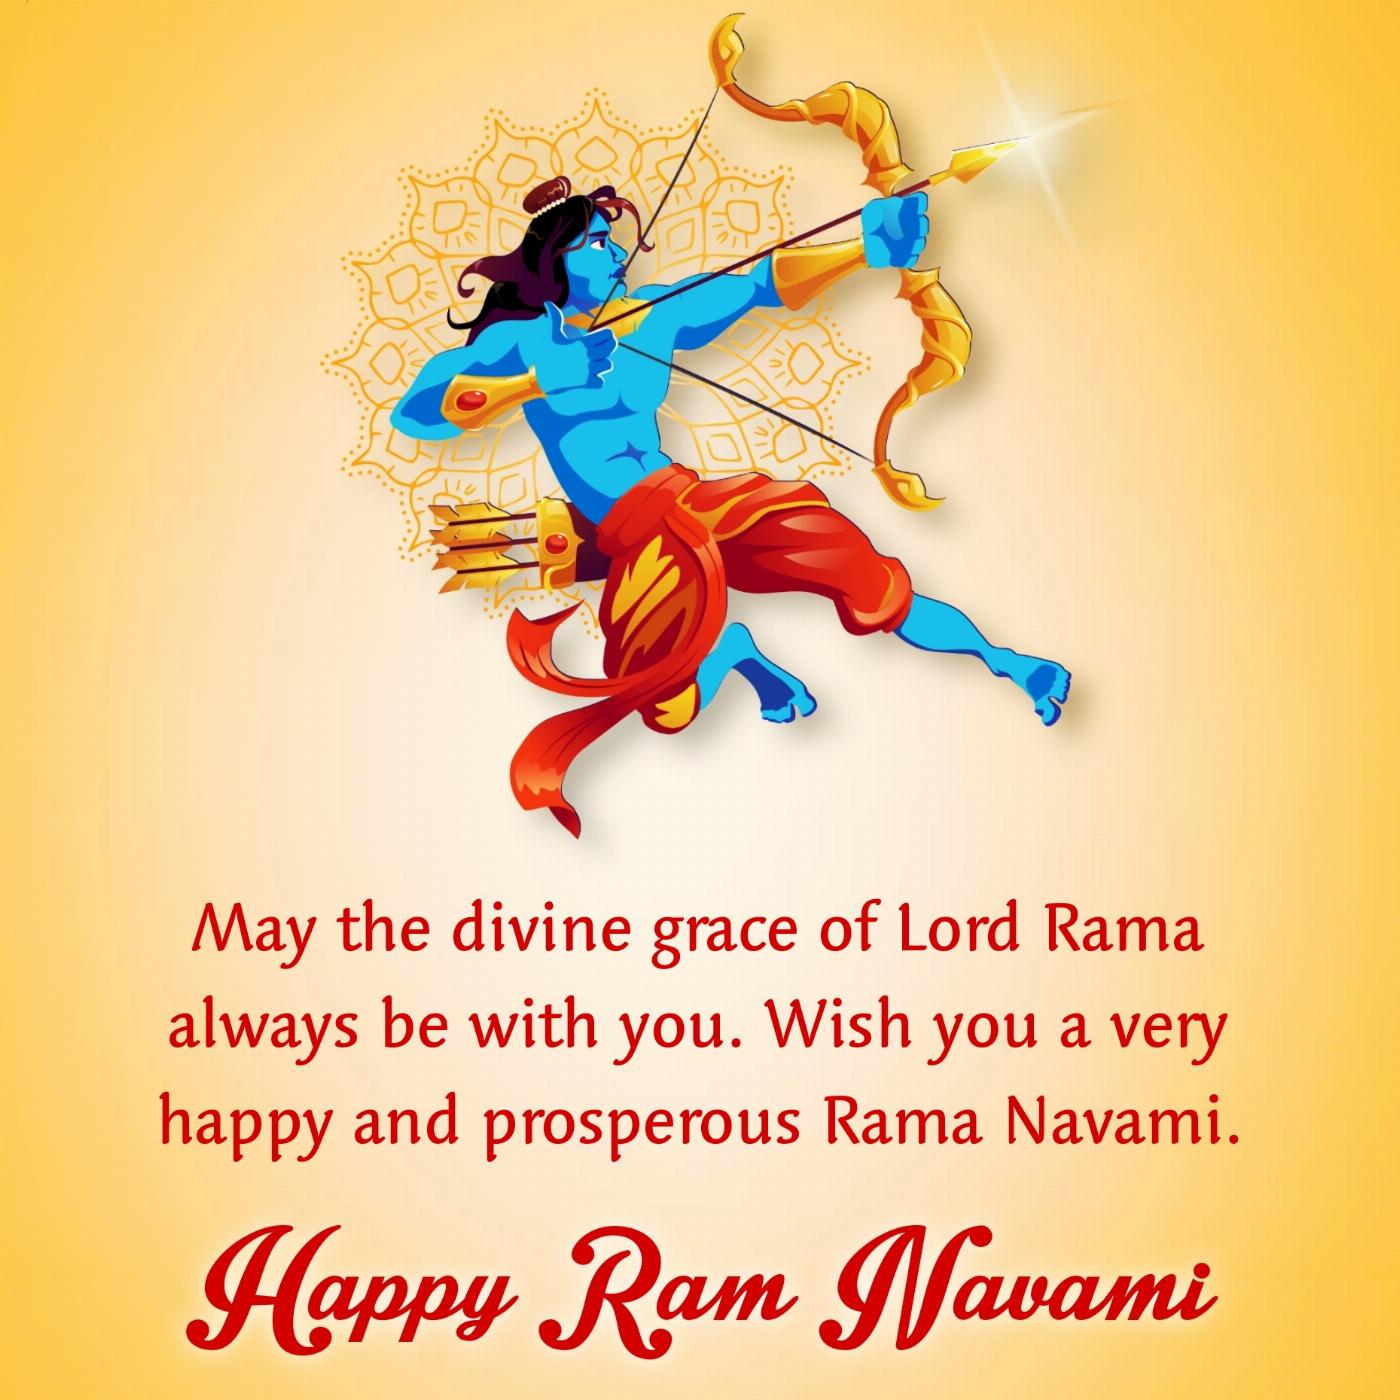 May the divine grace of Lord Rama always be with you